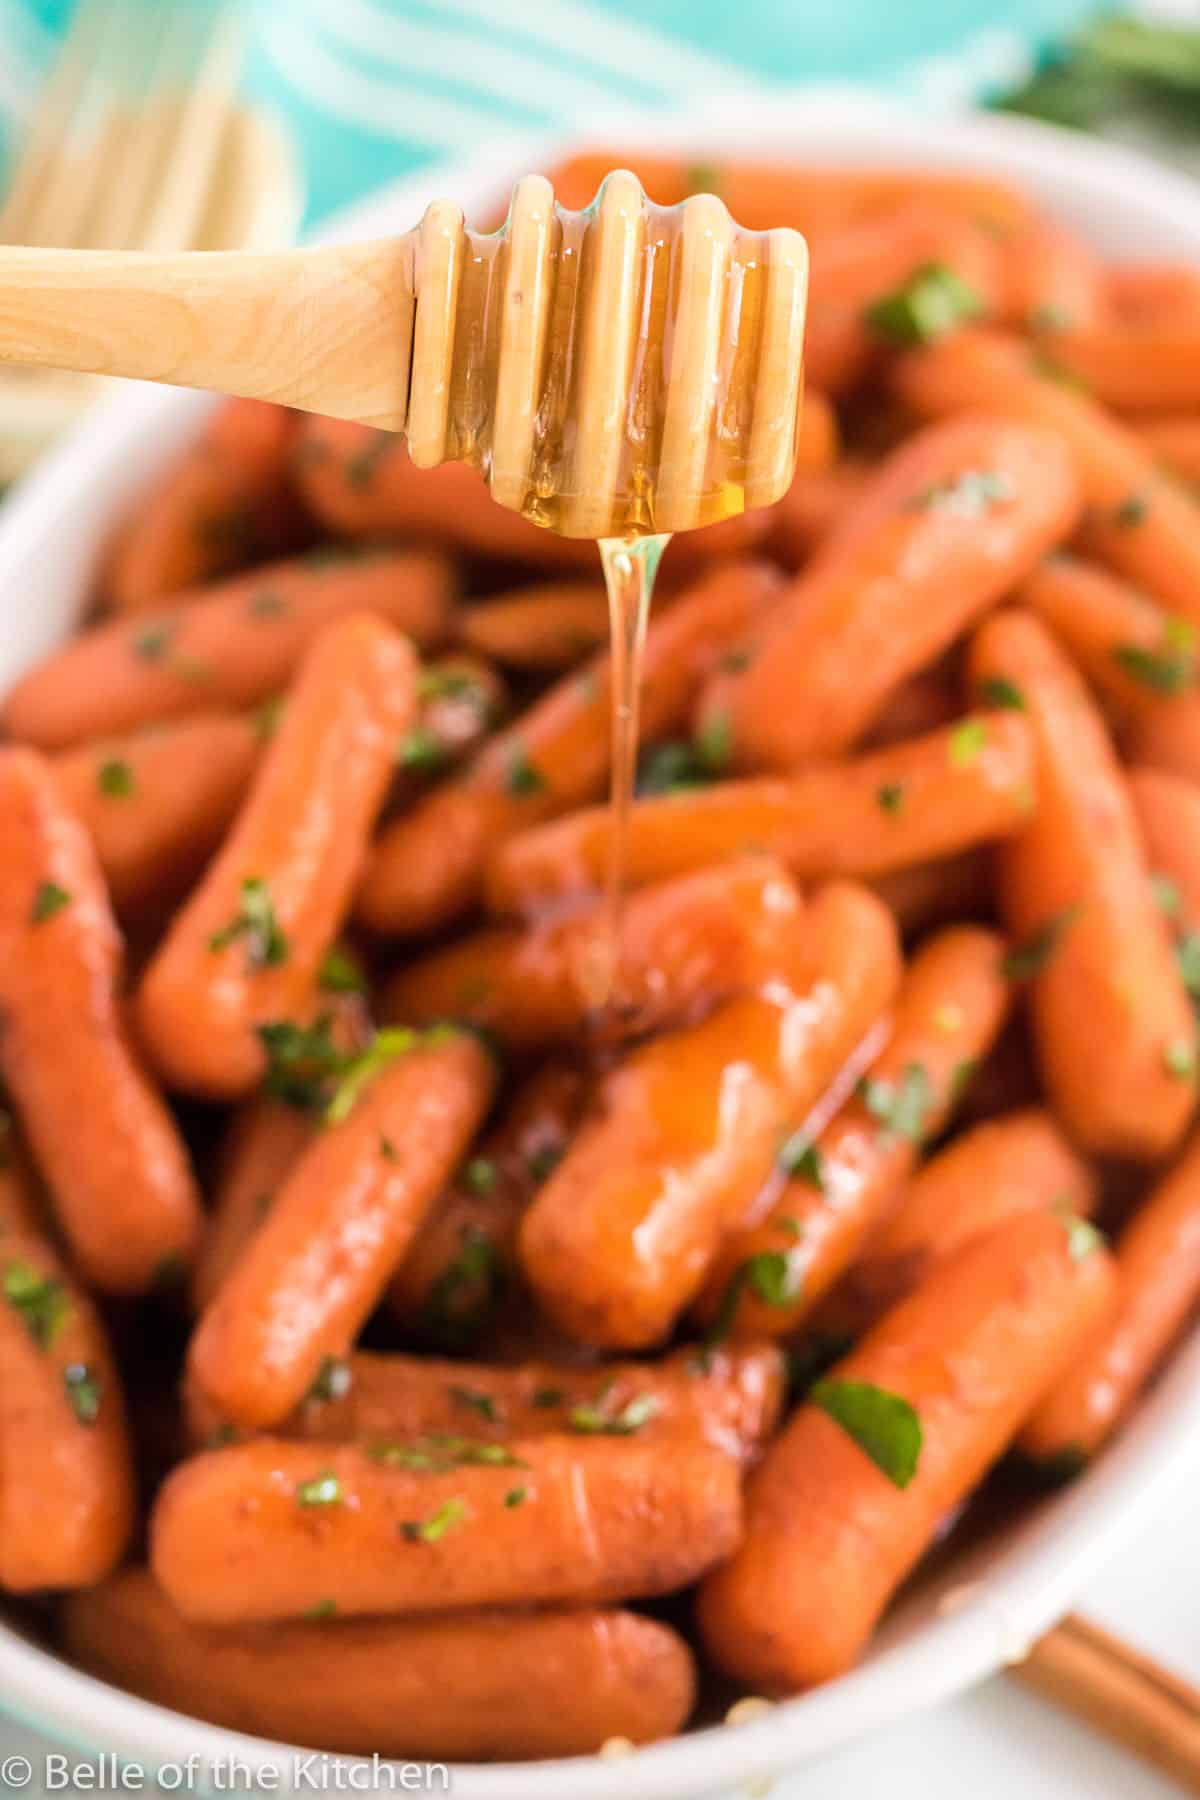 honey drizzled over carrots